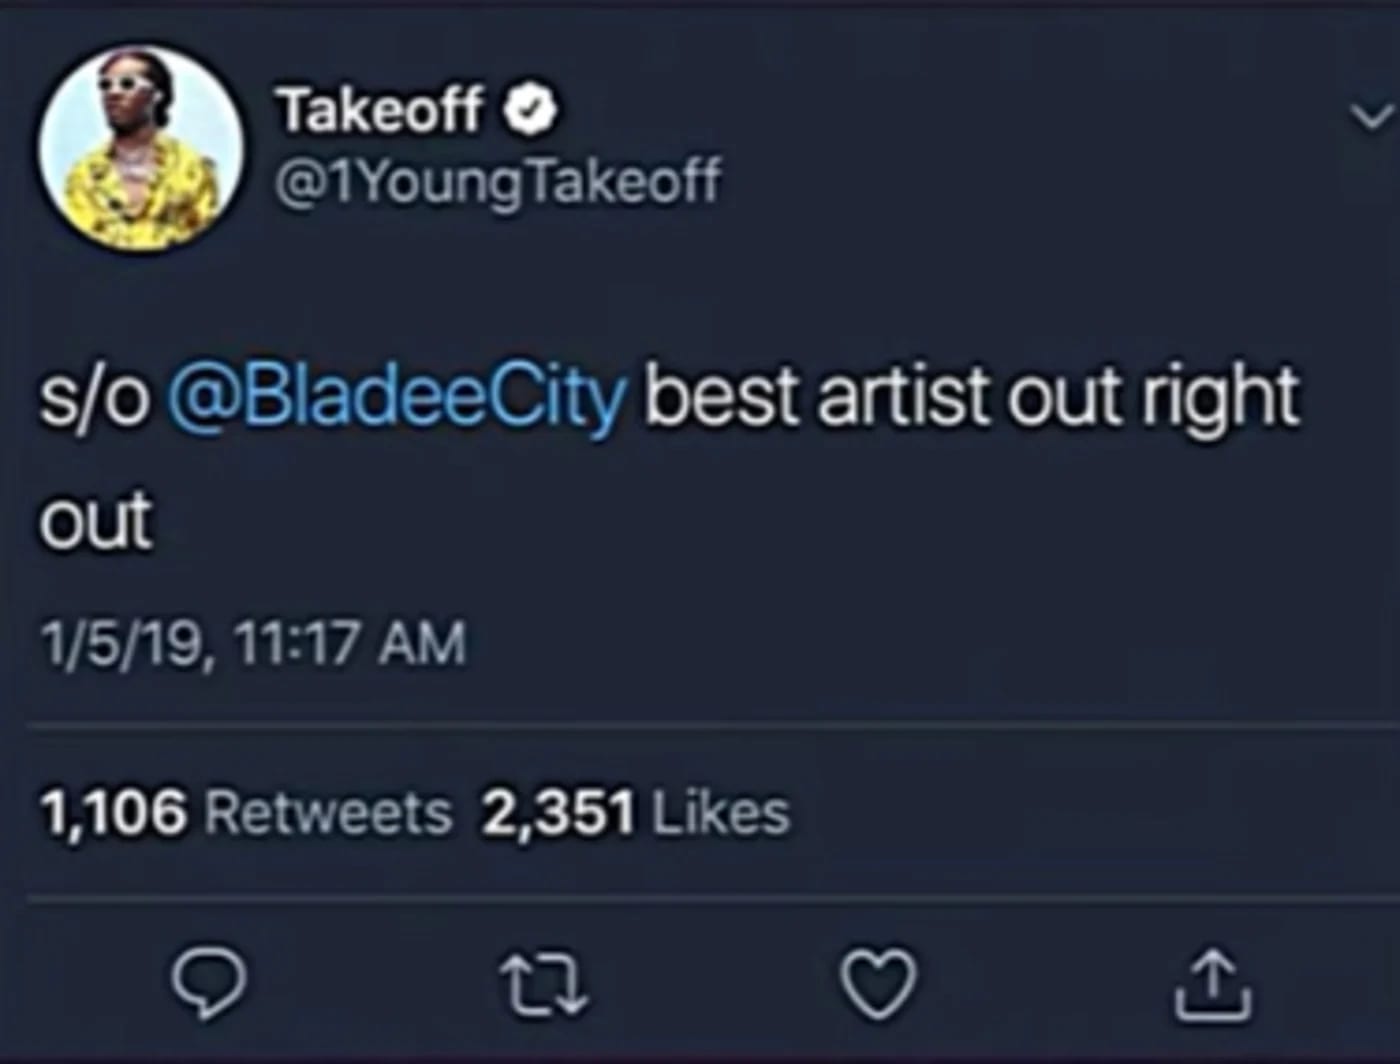 Takeoff shouts out Bladee